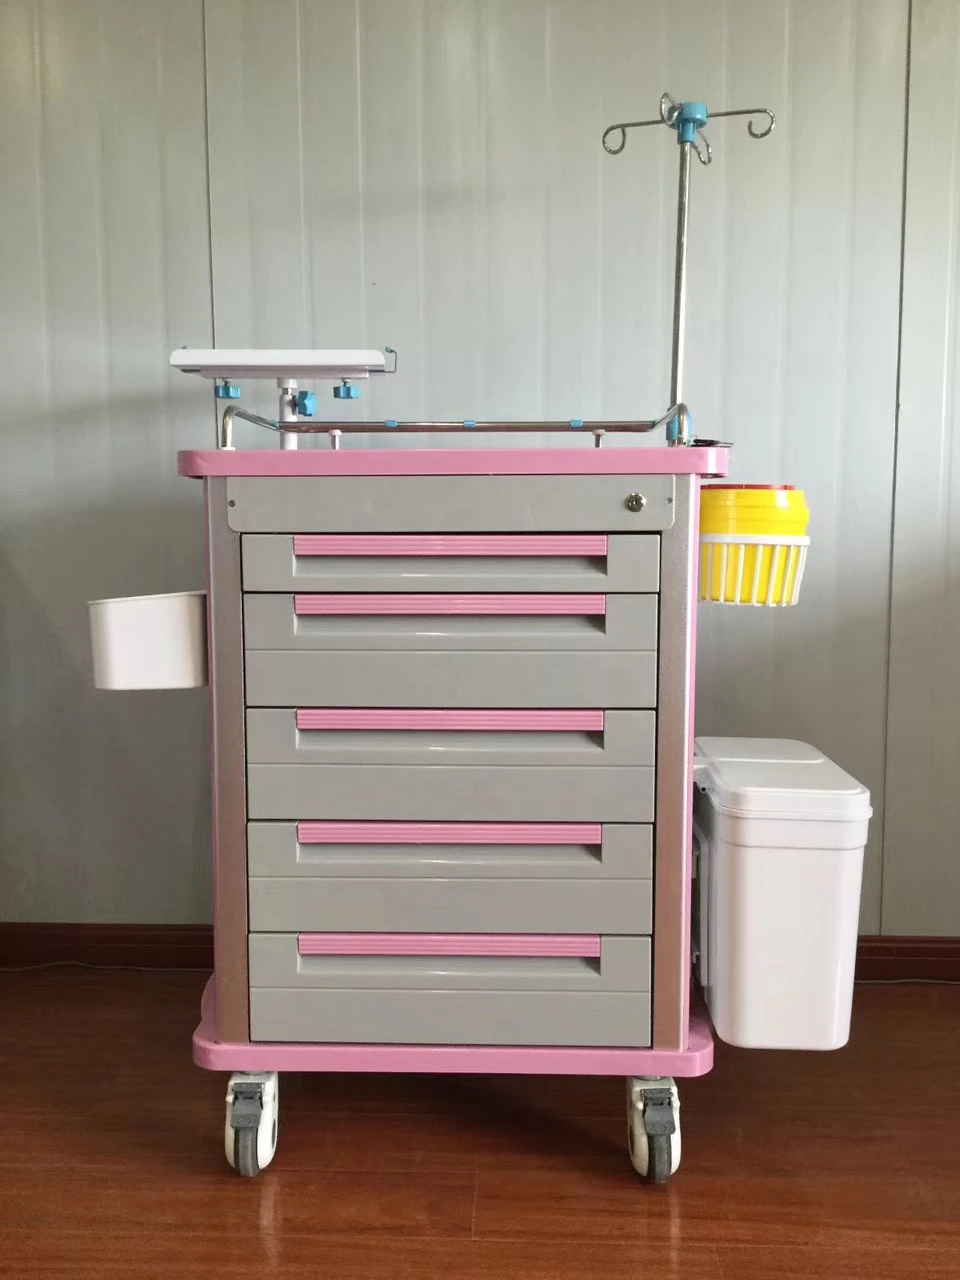 Medical emergency treatment nursing medication trolley cart workstation with drawers on wheels equipment supply